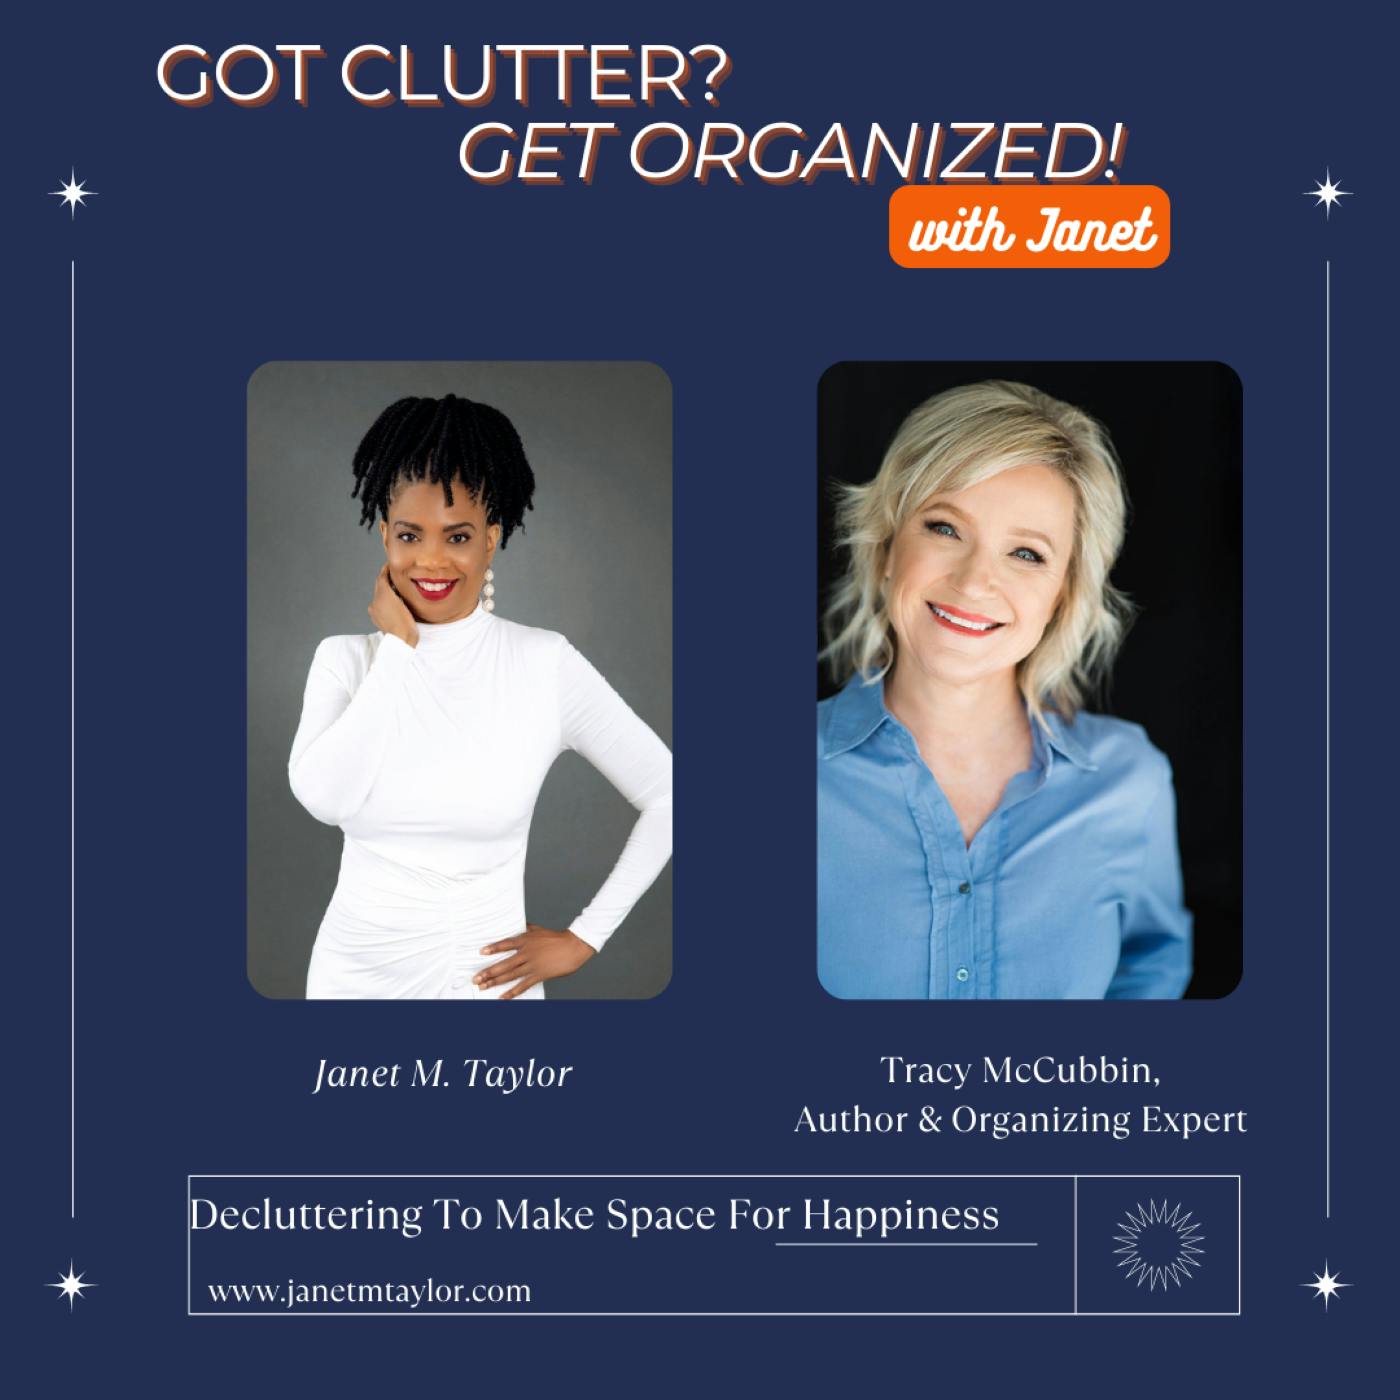 Decluttering Making Space For Happiness with Tracy McCubbin, Author and Organizing Expert